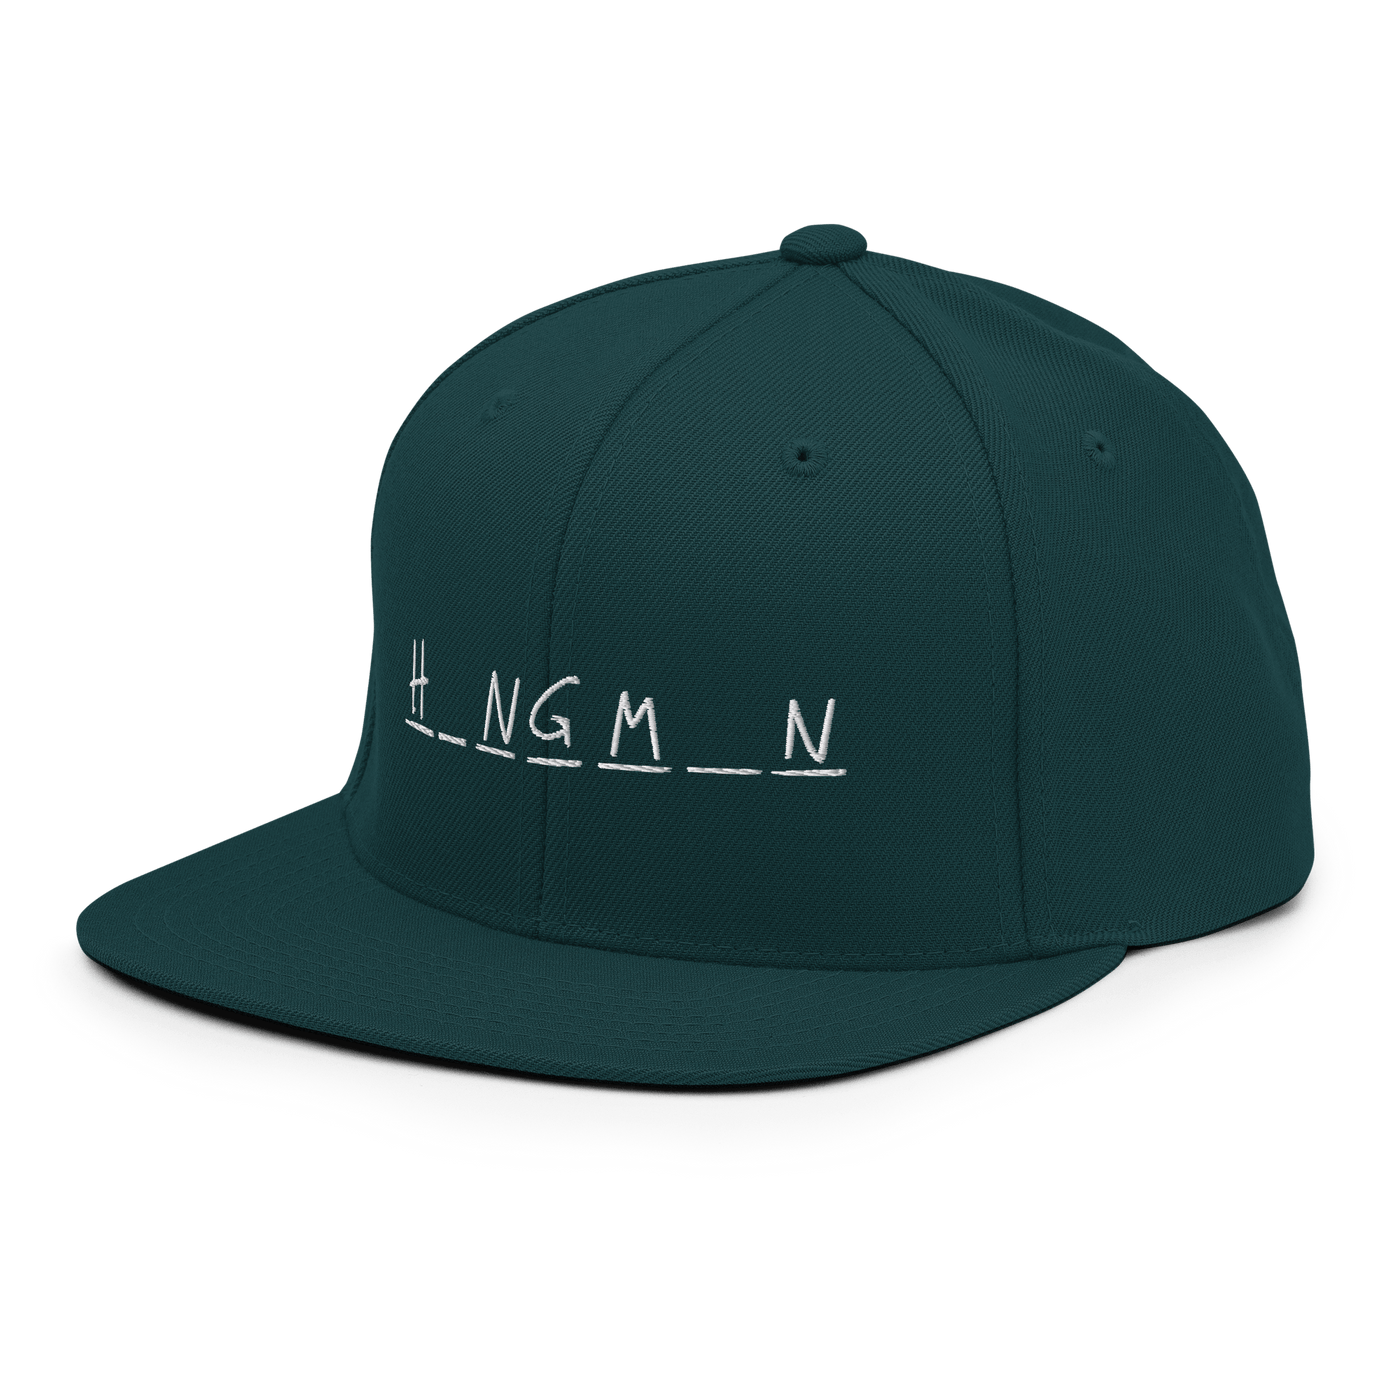 Hangman Snapback - Spruce - - Just Another Cap Store